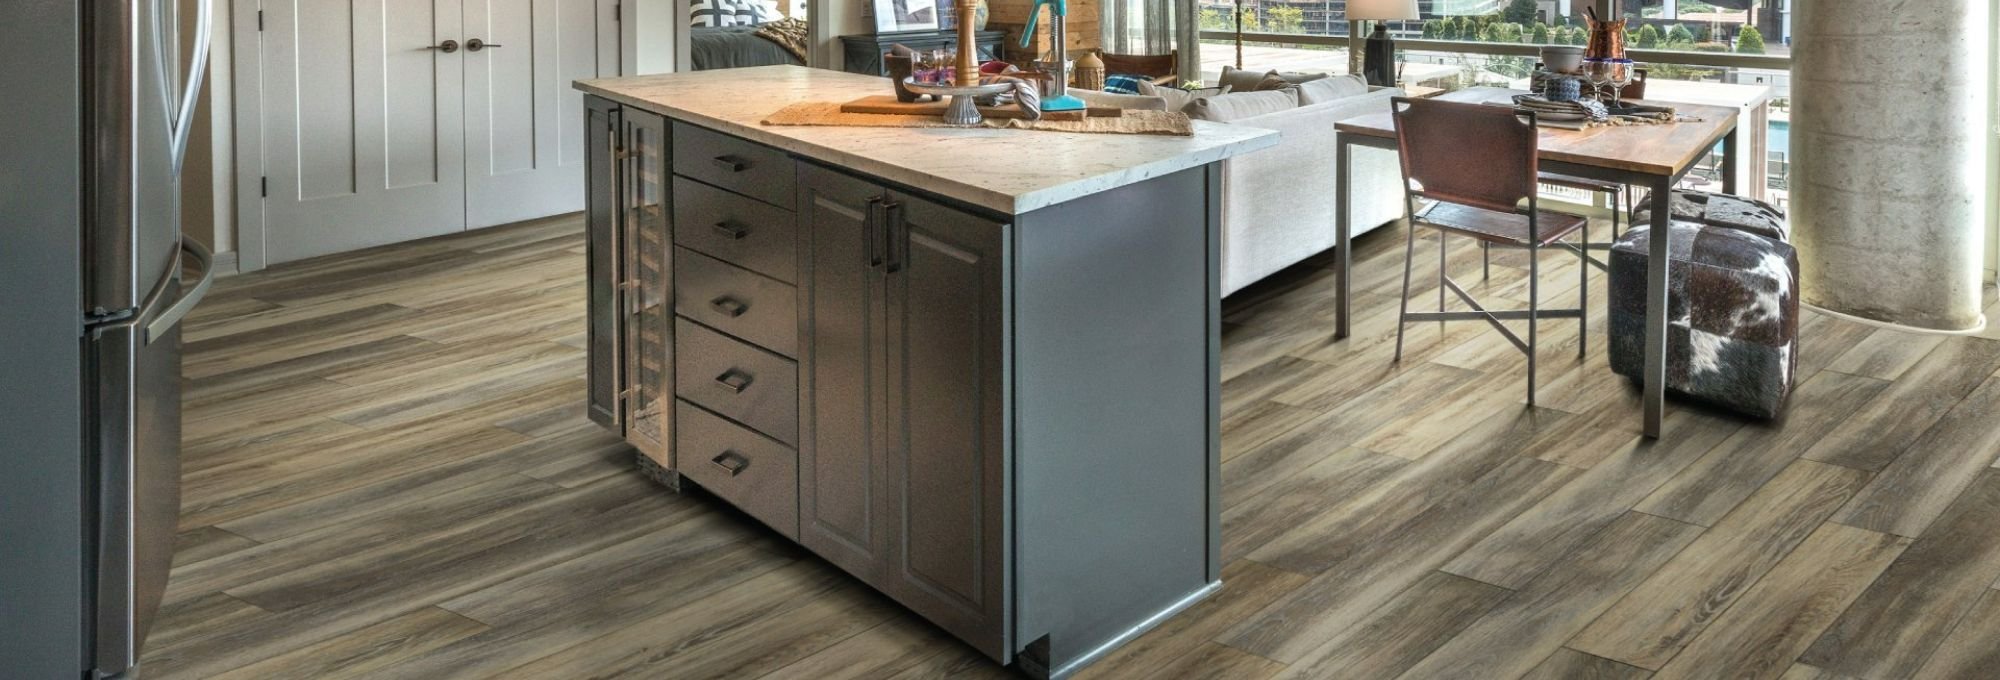 gray kitchen furniture and brown vinyl floor from The Carpet and Drapery Shoppe in Escanaba, MI